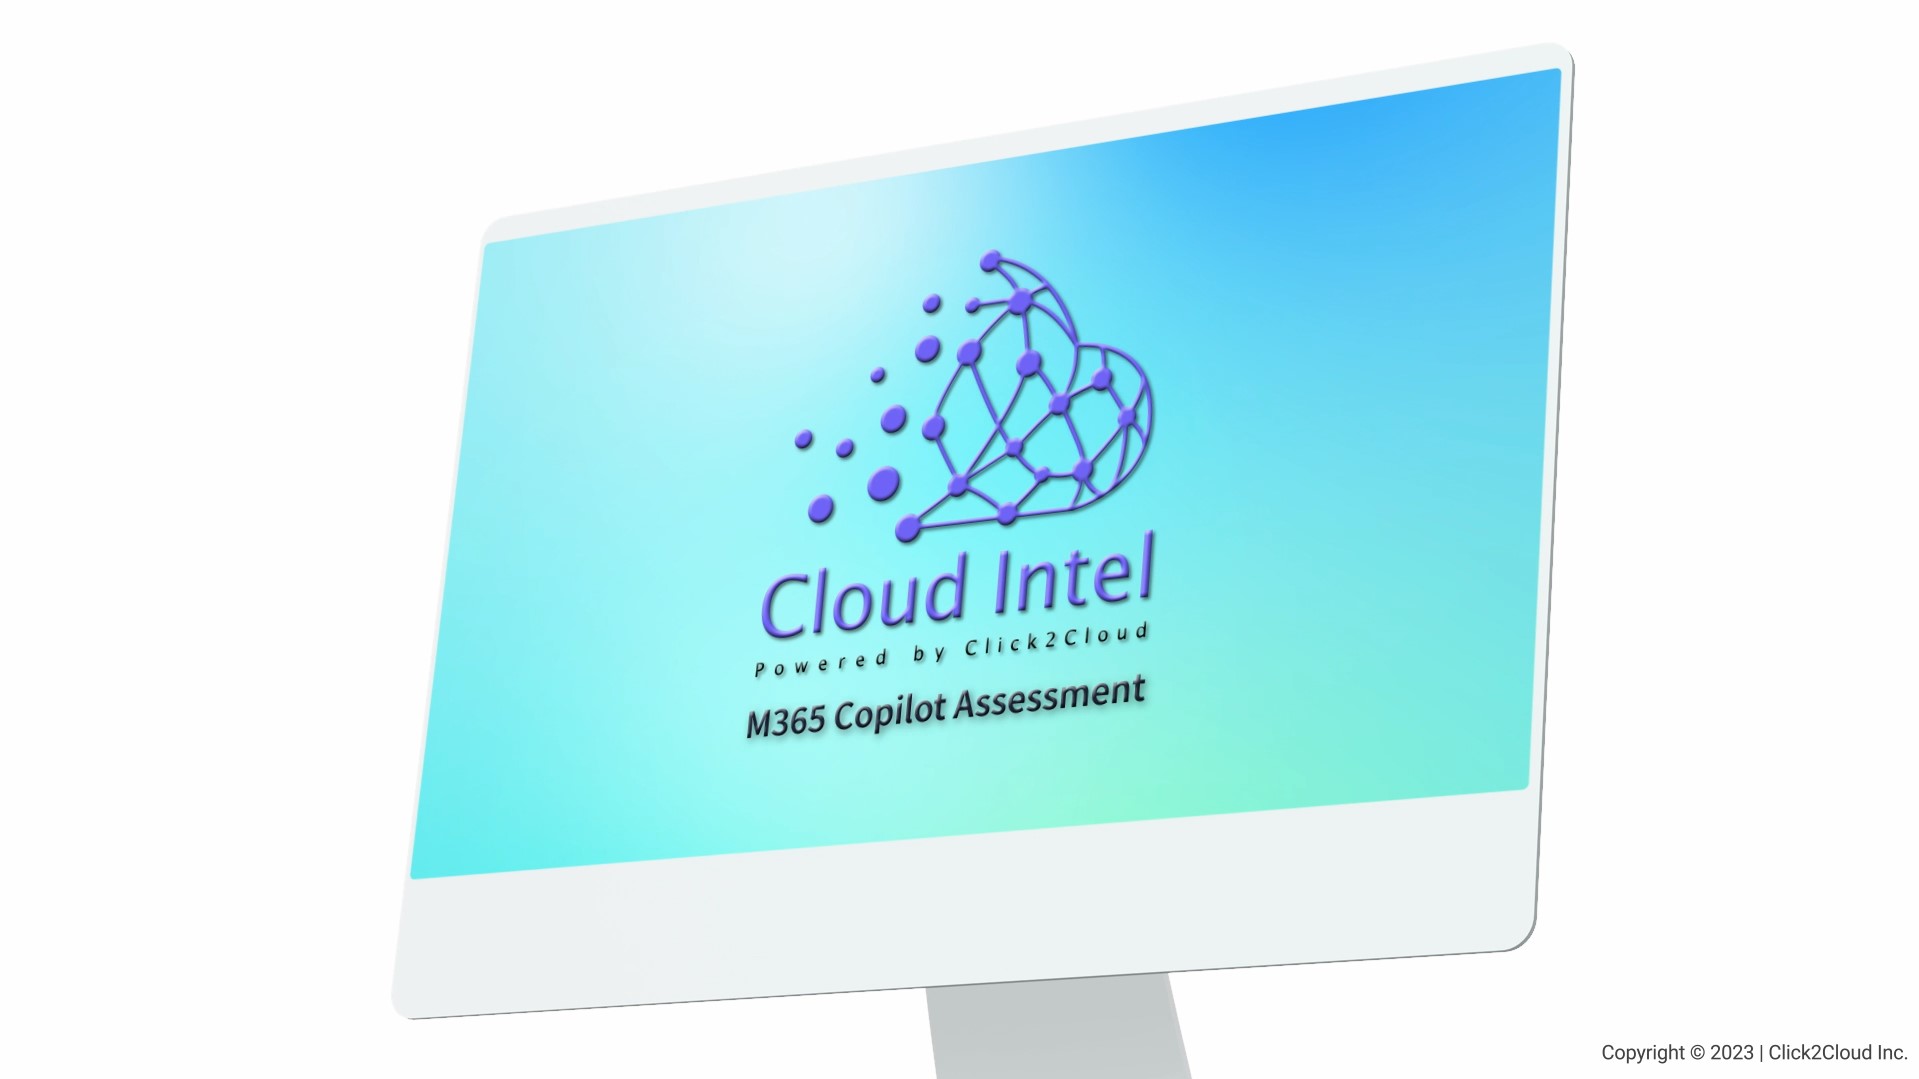 Usher in a Brighter Future of Work with Cloud Intel’s M365 Copilot Assessment-Click2Cloud